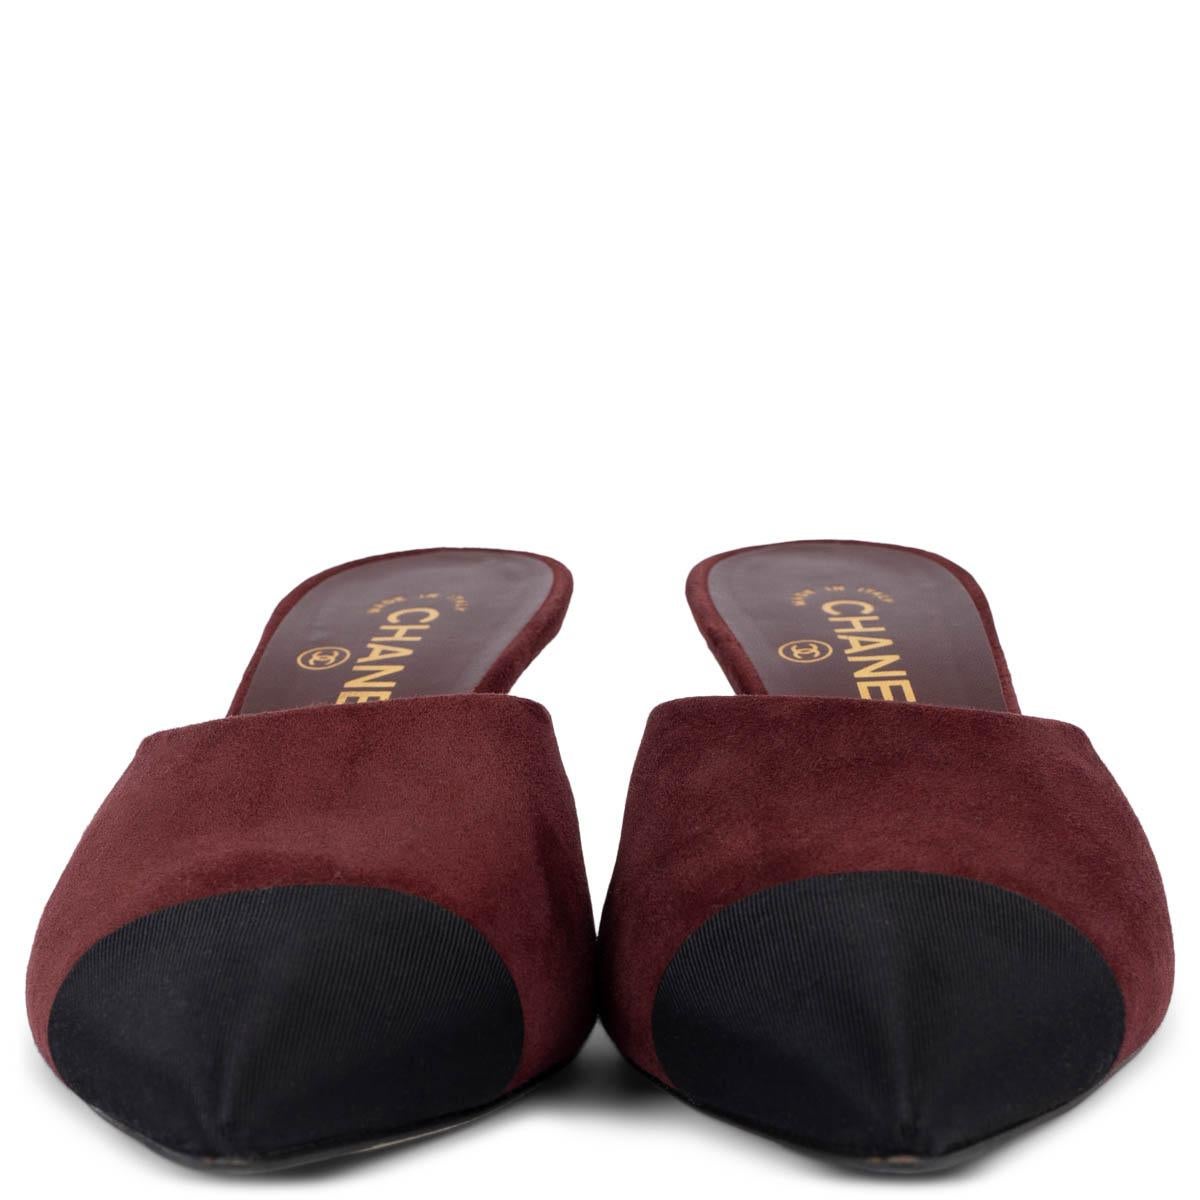 100% authentic Chanel mules in burgundy suede with classic black grosgrain tip. Have been worn and are in excellent condition. 

2016 Paris-Rome Metiers d'Art

Measurements
Model	16A G32102
Imprinted Size	39
Shoe Size	39
Inside Sole	26cm